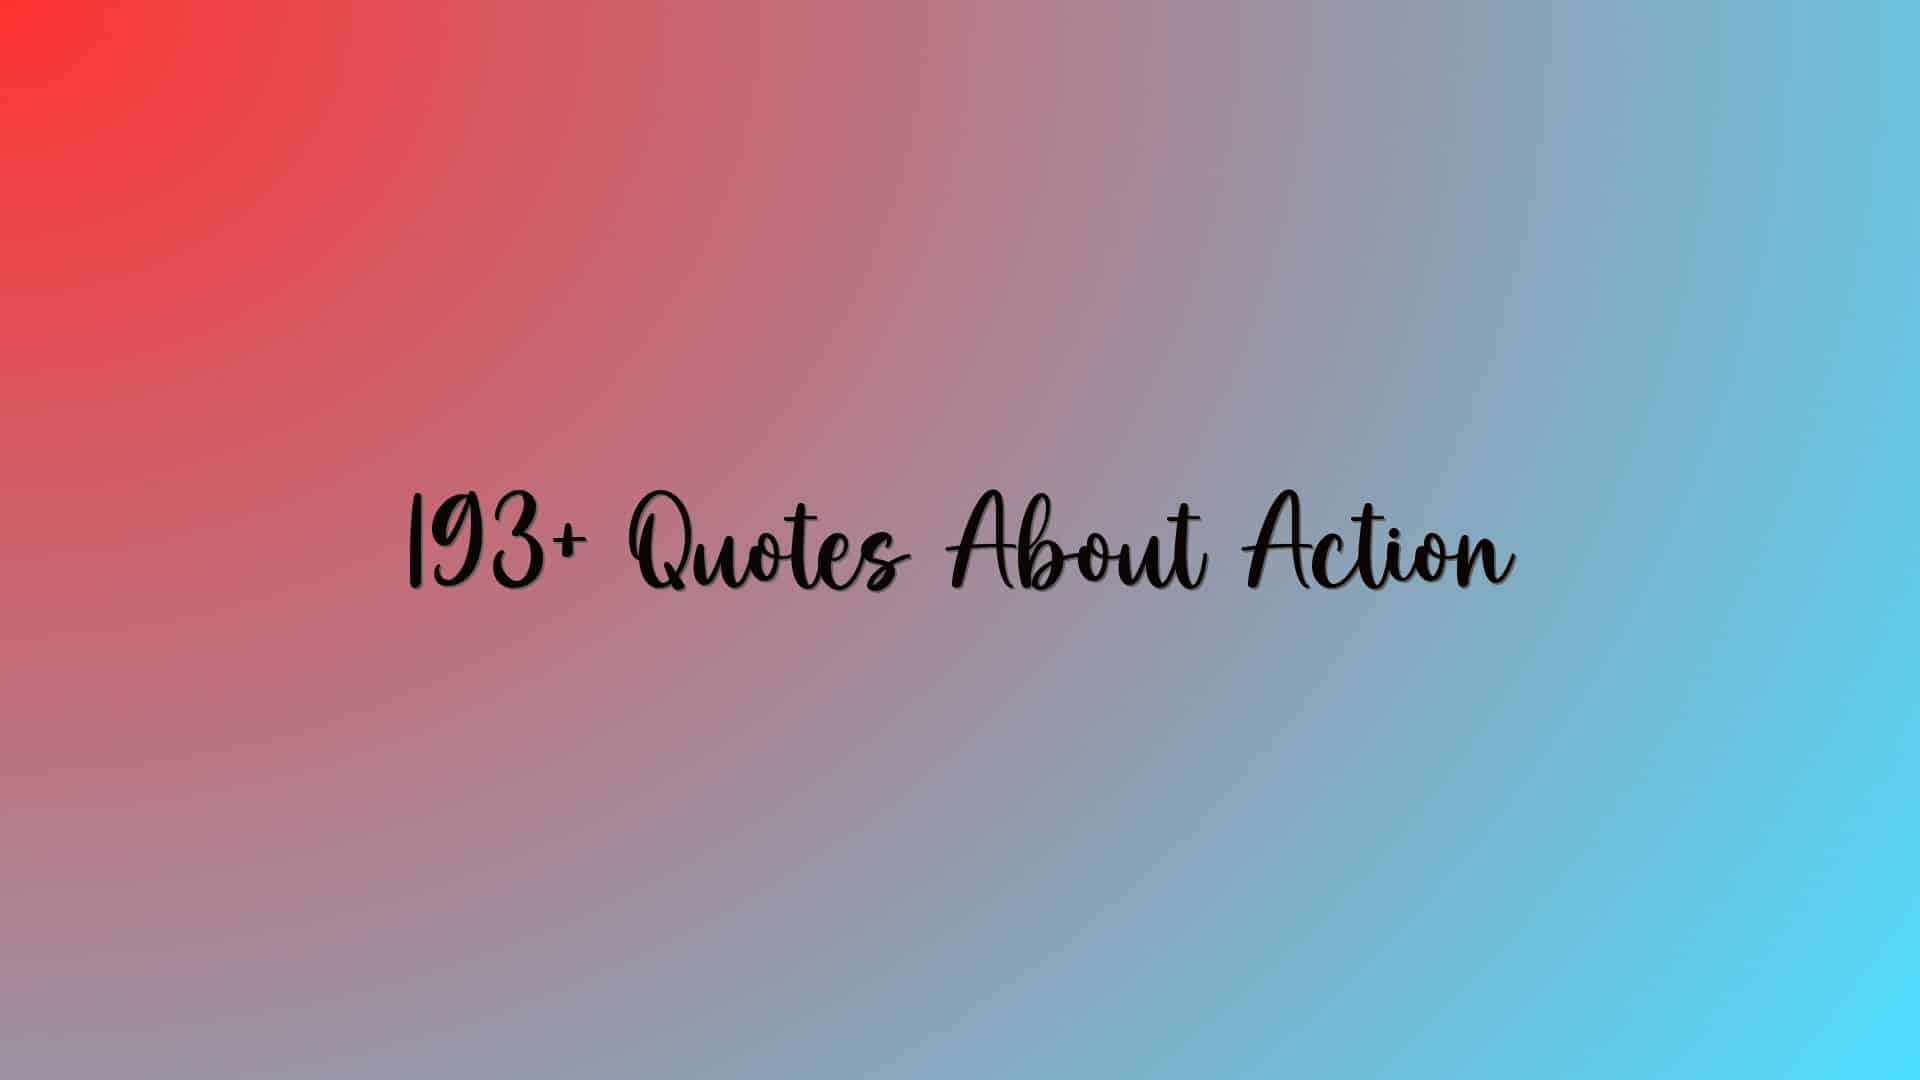 193+ Quotes About Action